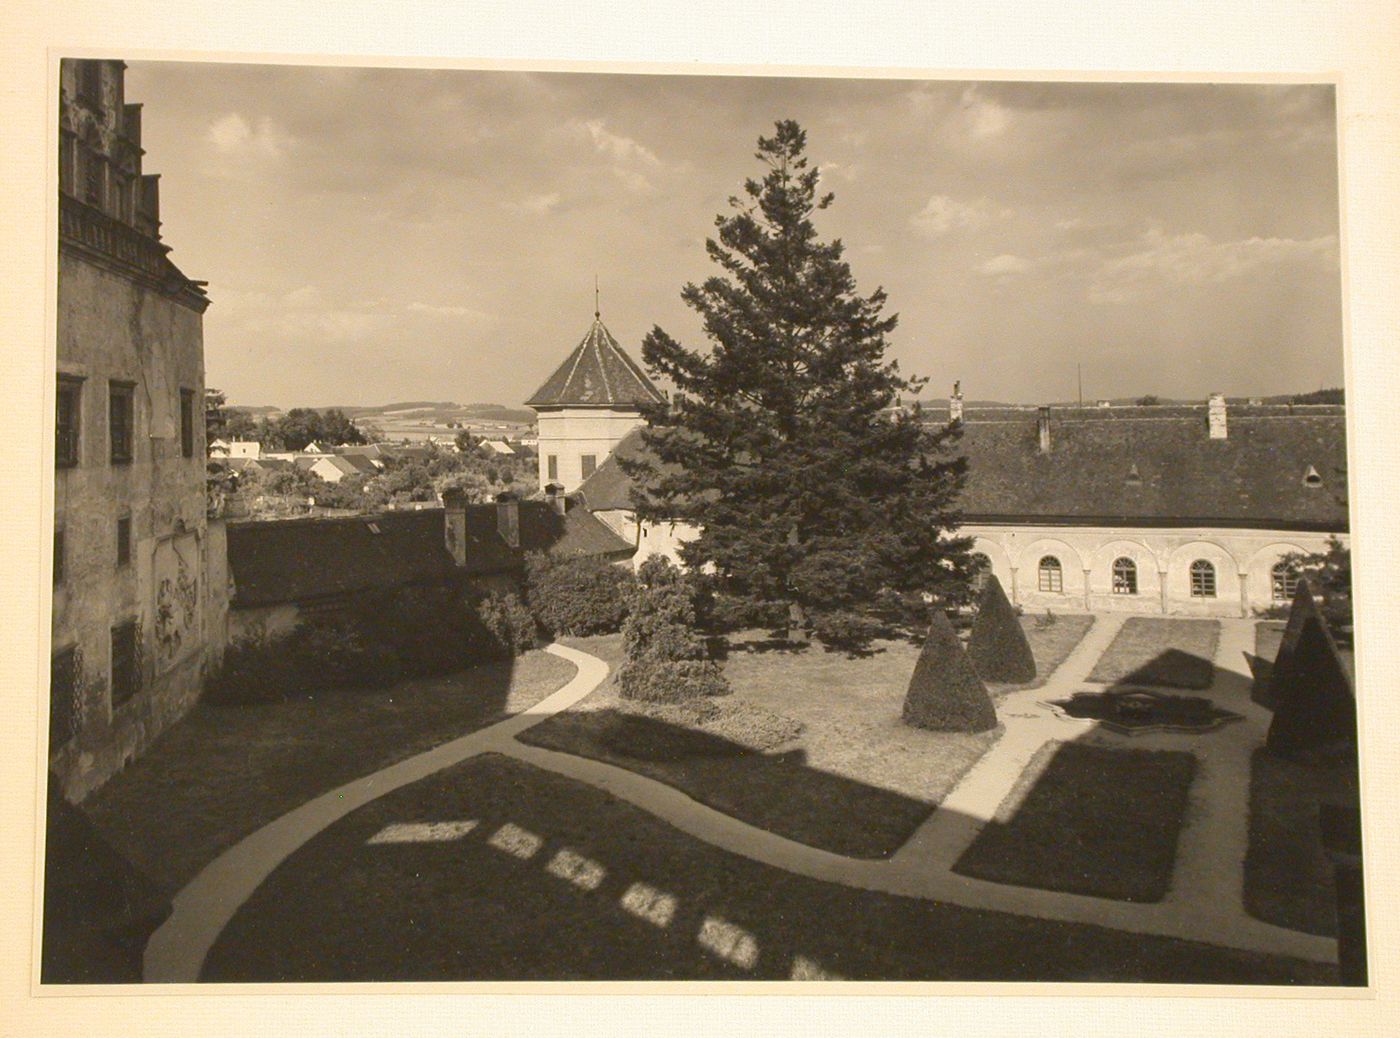 View of the formal gardens of Telc Château showing a wing (now the Art Gallery Jana Zrzavého) of the Château on the right, Telc, Czechoslovakia (now Czech Republic)